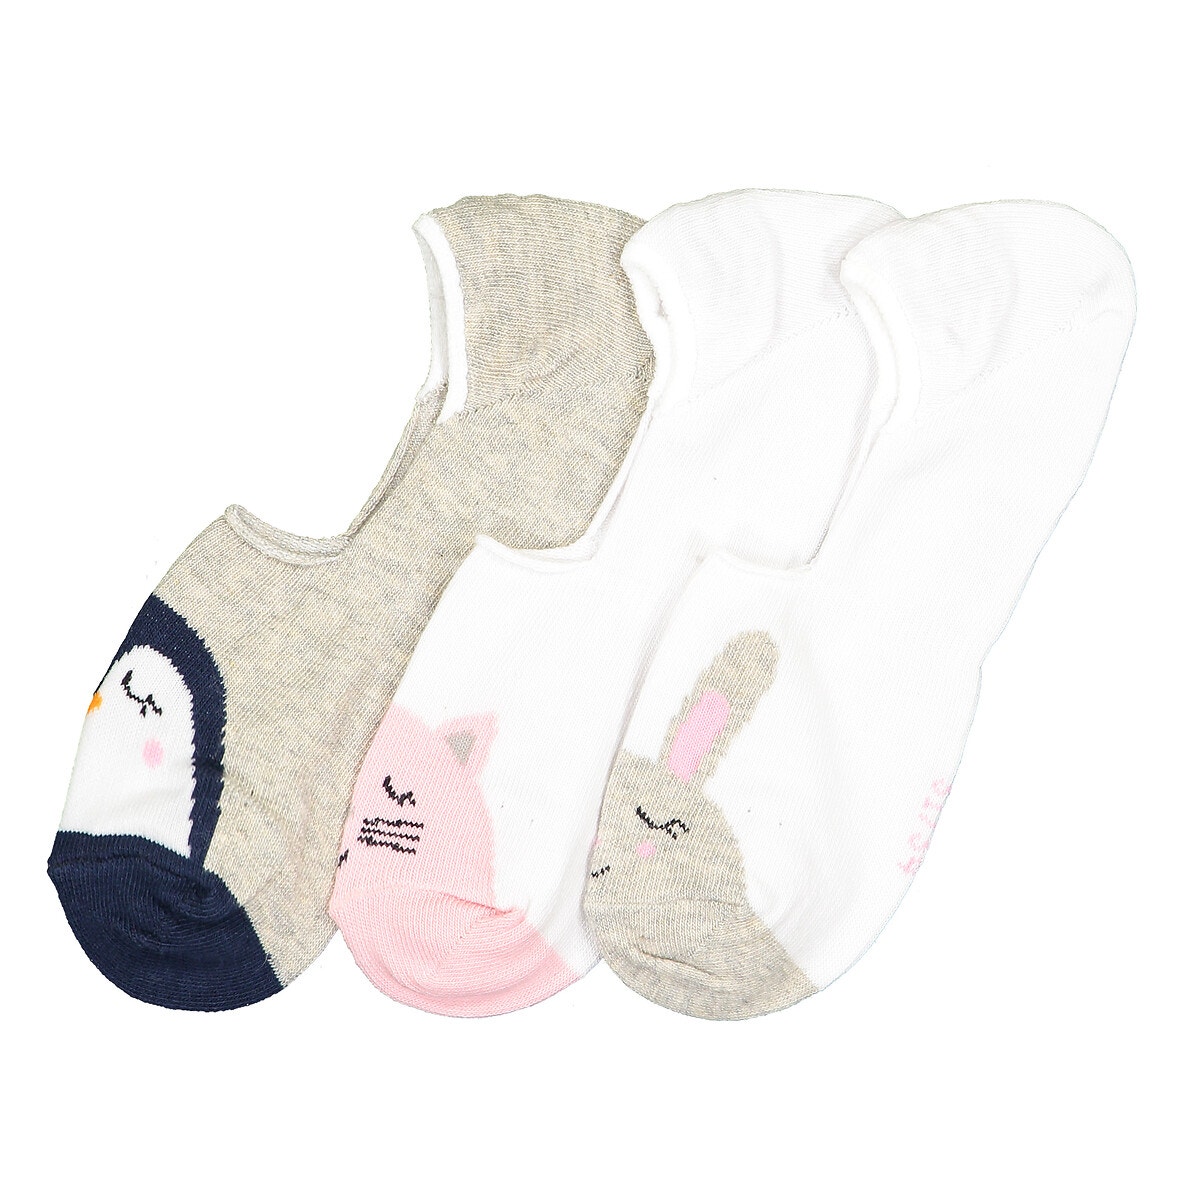 Pack of 3 Pairs of Cotton Mix Invisible Trainer Socks ΠΑΙΔΙ | Παπούτσια | Κάλτσες & καλσόν